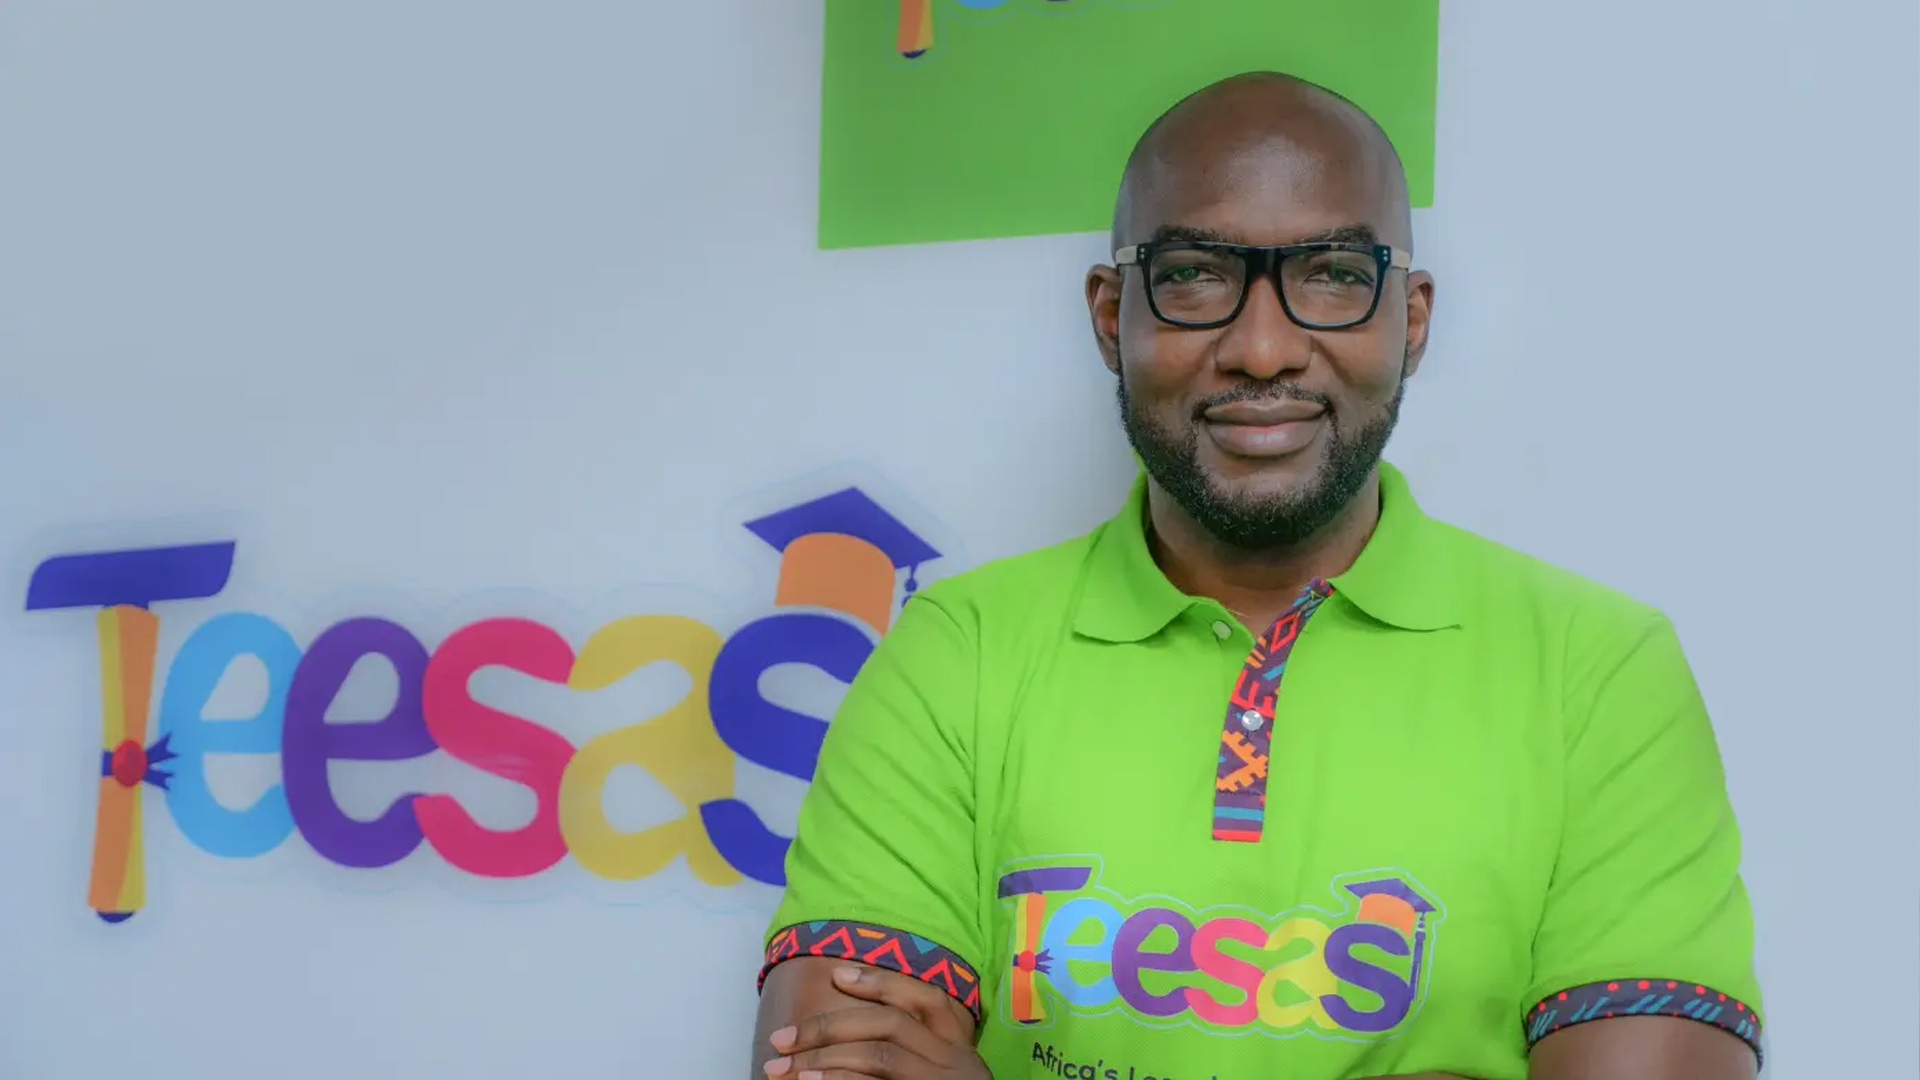 Teesas Raises $1.6M Pre-Seed Round To Provide Students More Learning Lessons In Africa